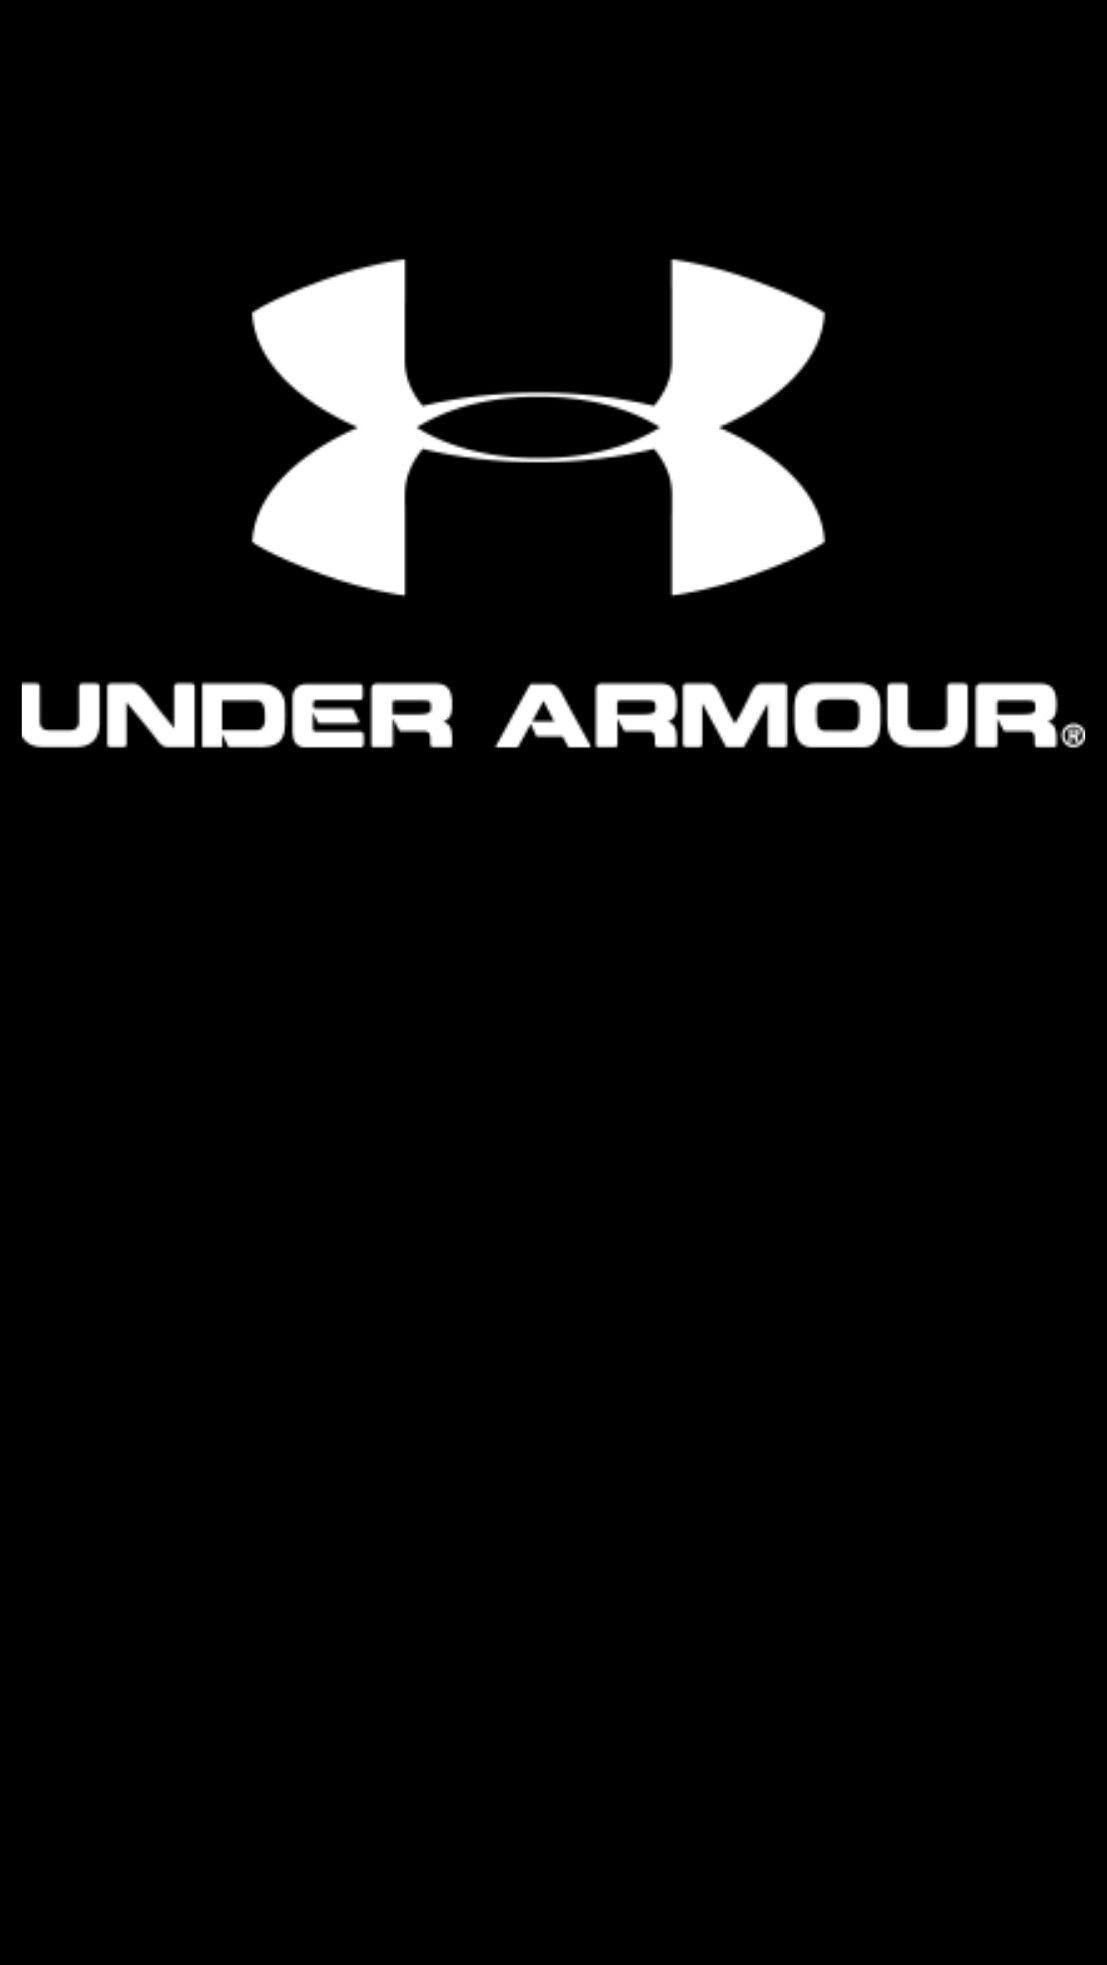 under armour #black #wallpaper #android #iphone. Under armour